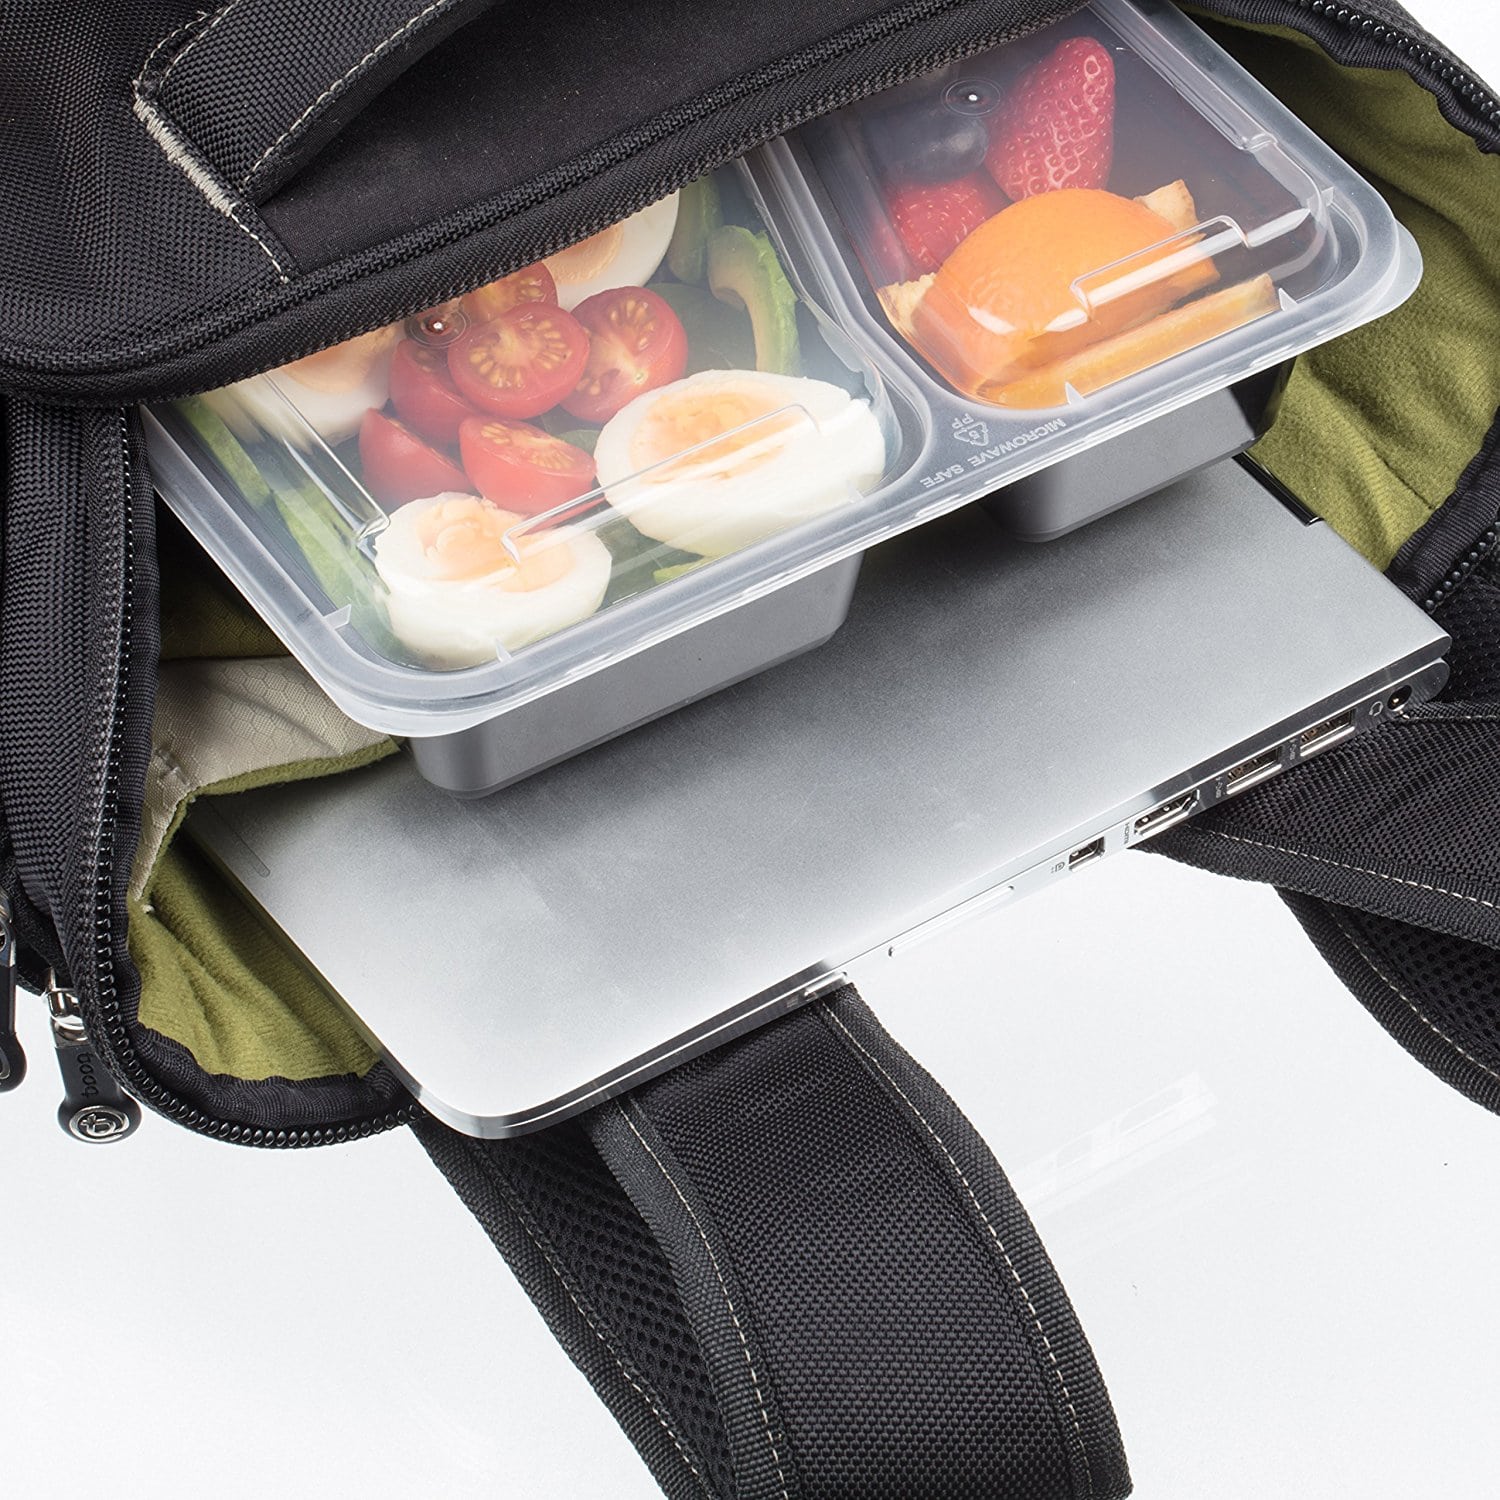 https://nl.igluumealprep.com/cdn/shop/products/10-pack-2-Compartment-BPA-Free-Reusable-Meal-Prep-Containers-Plastic-Food-Storage-Trays-with-Airtight-Lids-Microwa-B06XDJP3M2-4_a2eb8688-edb0-4145-949f-5c5109121d66.jpg?v=1702481033&width=1946